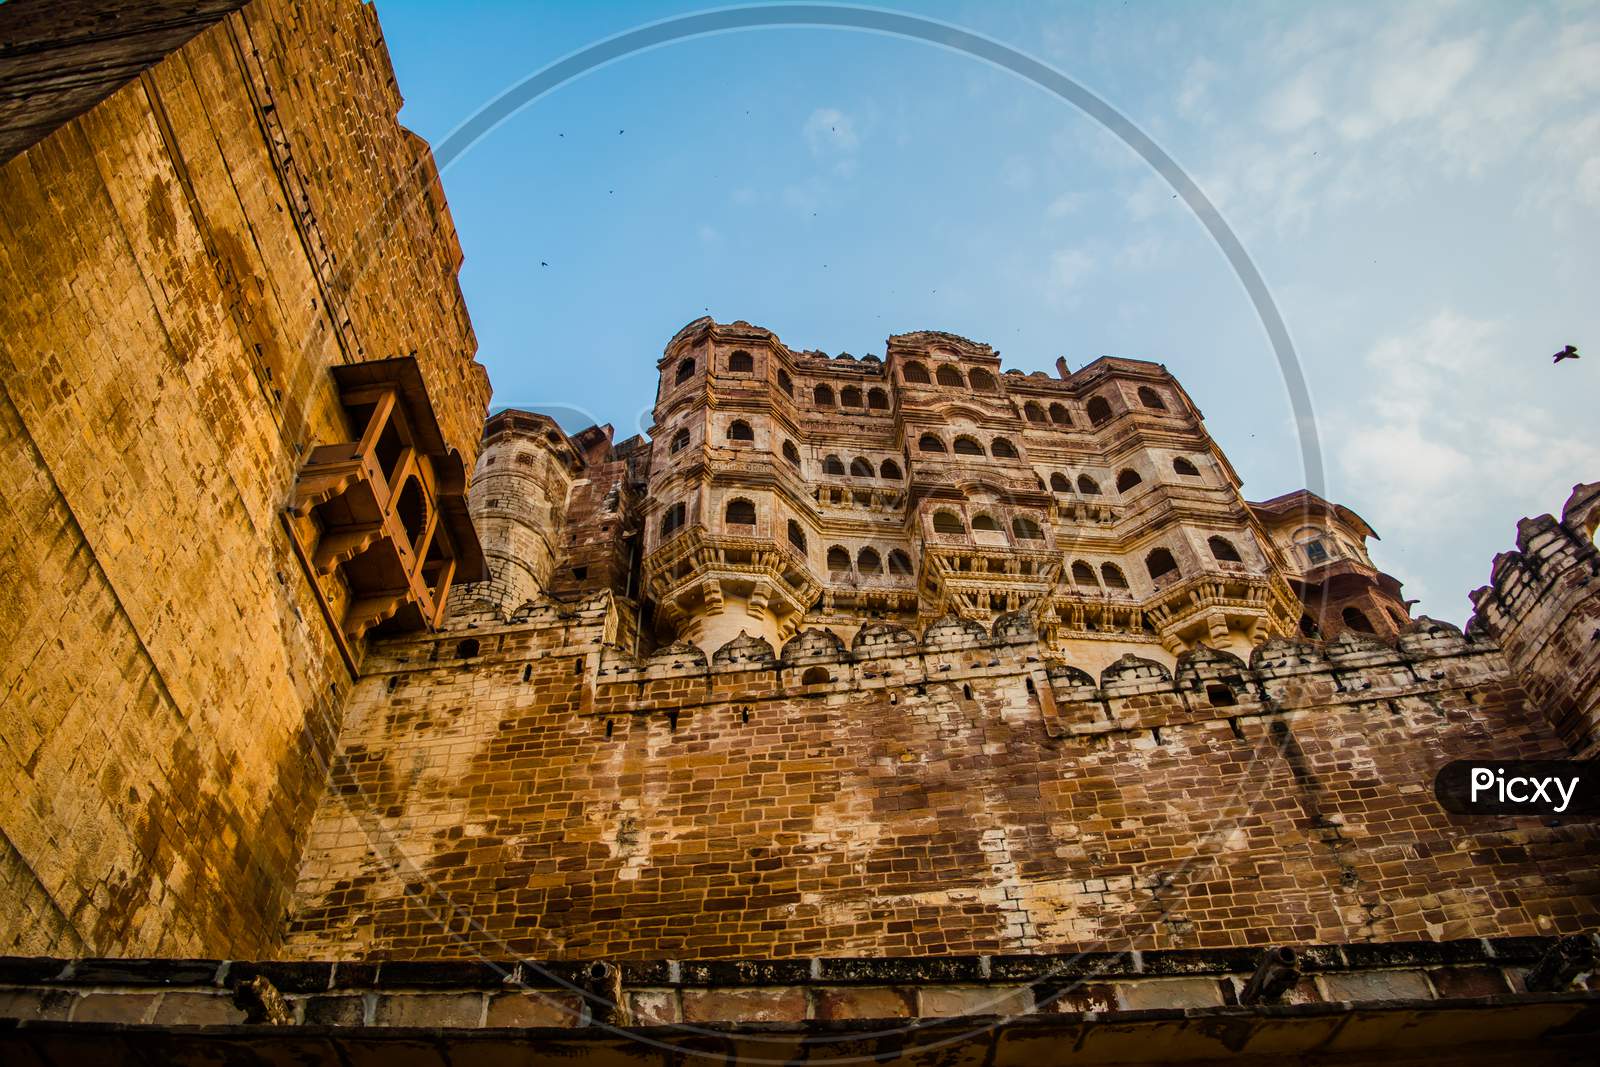 Mehrangarh or Mehran Fort, located in Jodhpur, Rajasthan, is one of the largest forts in India.